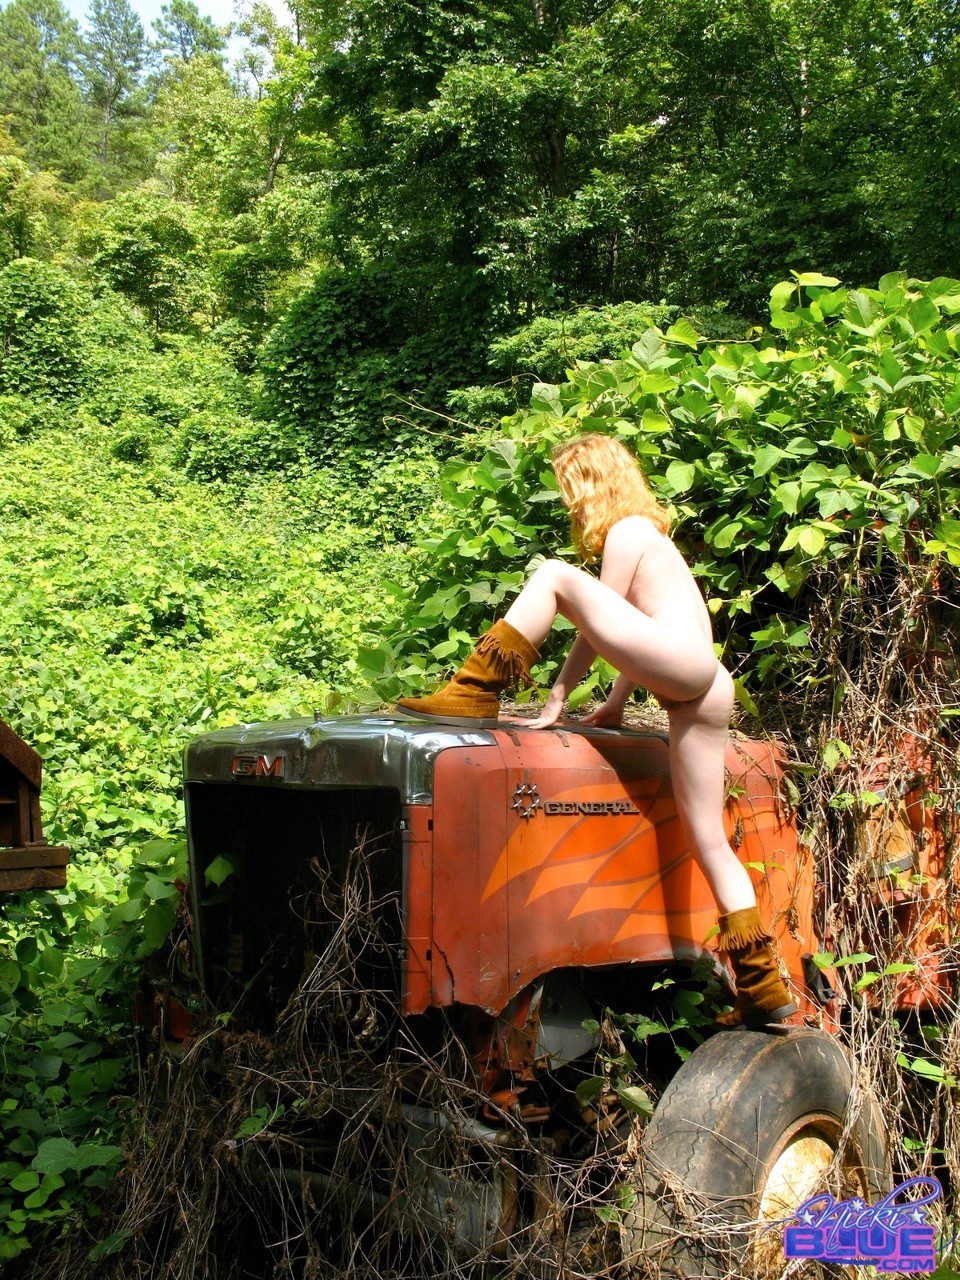 Amateur babe in boots Nicki Blue strips and poses on a tractor in the forest porno foto #424040516 | Pornstar Platinum Pics, Nicki Blue, Outdoor, mobiele porno